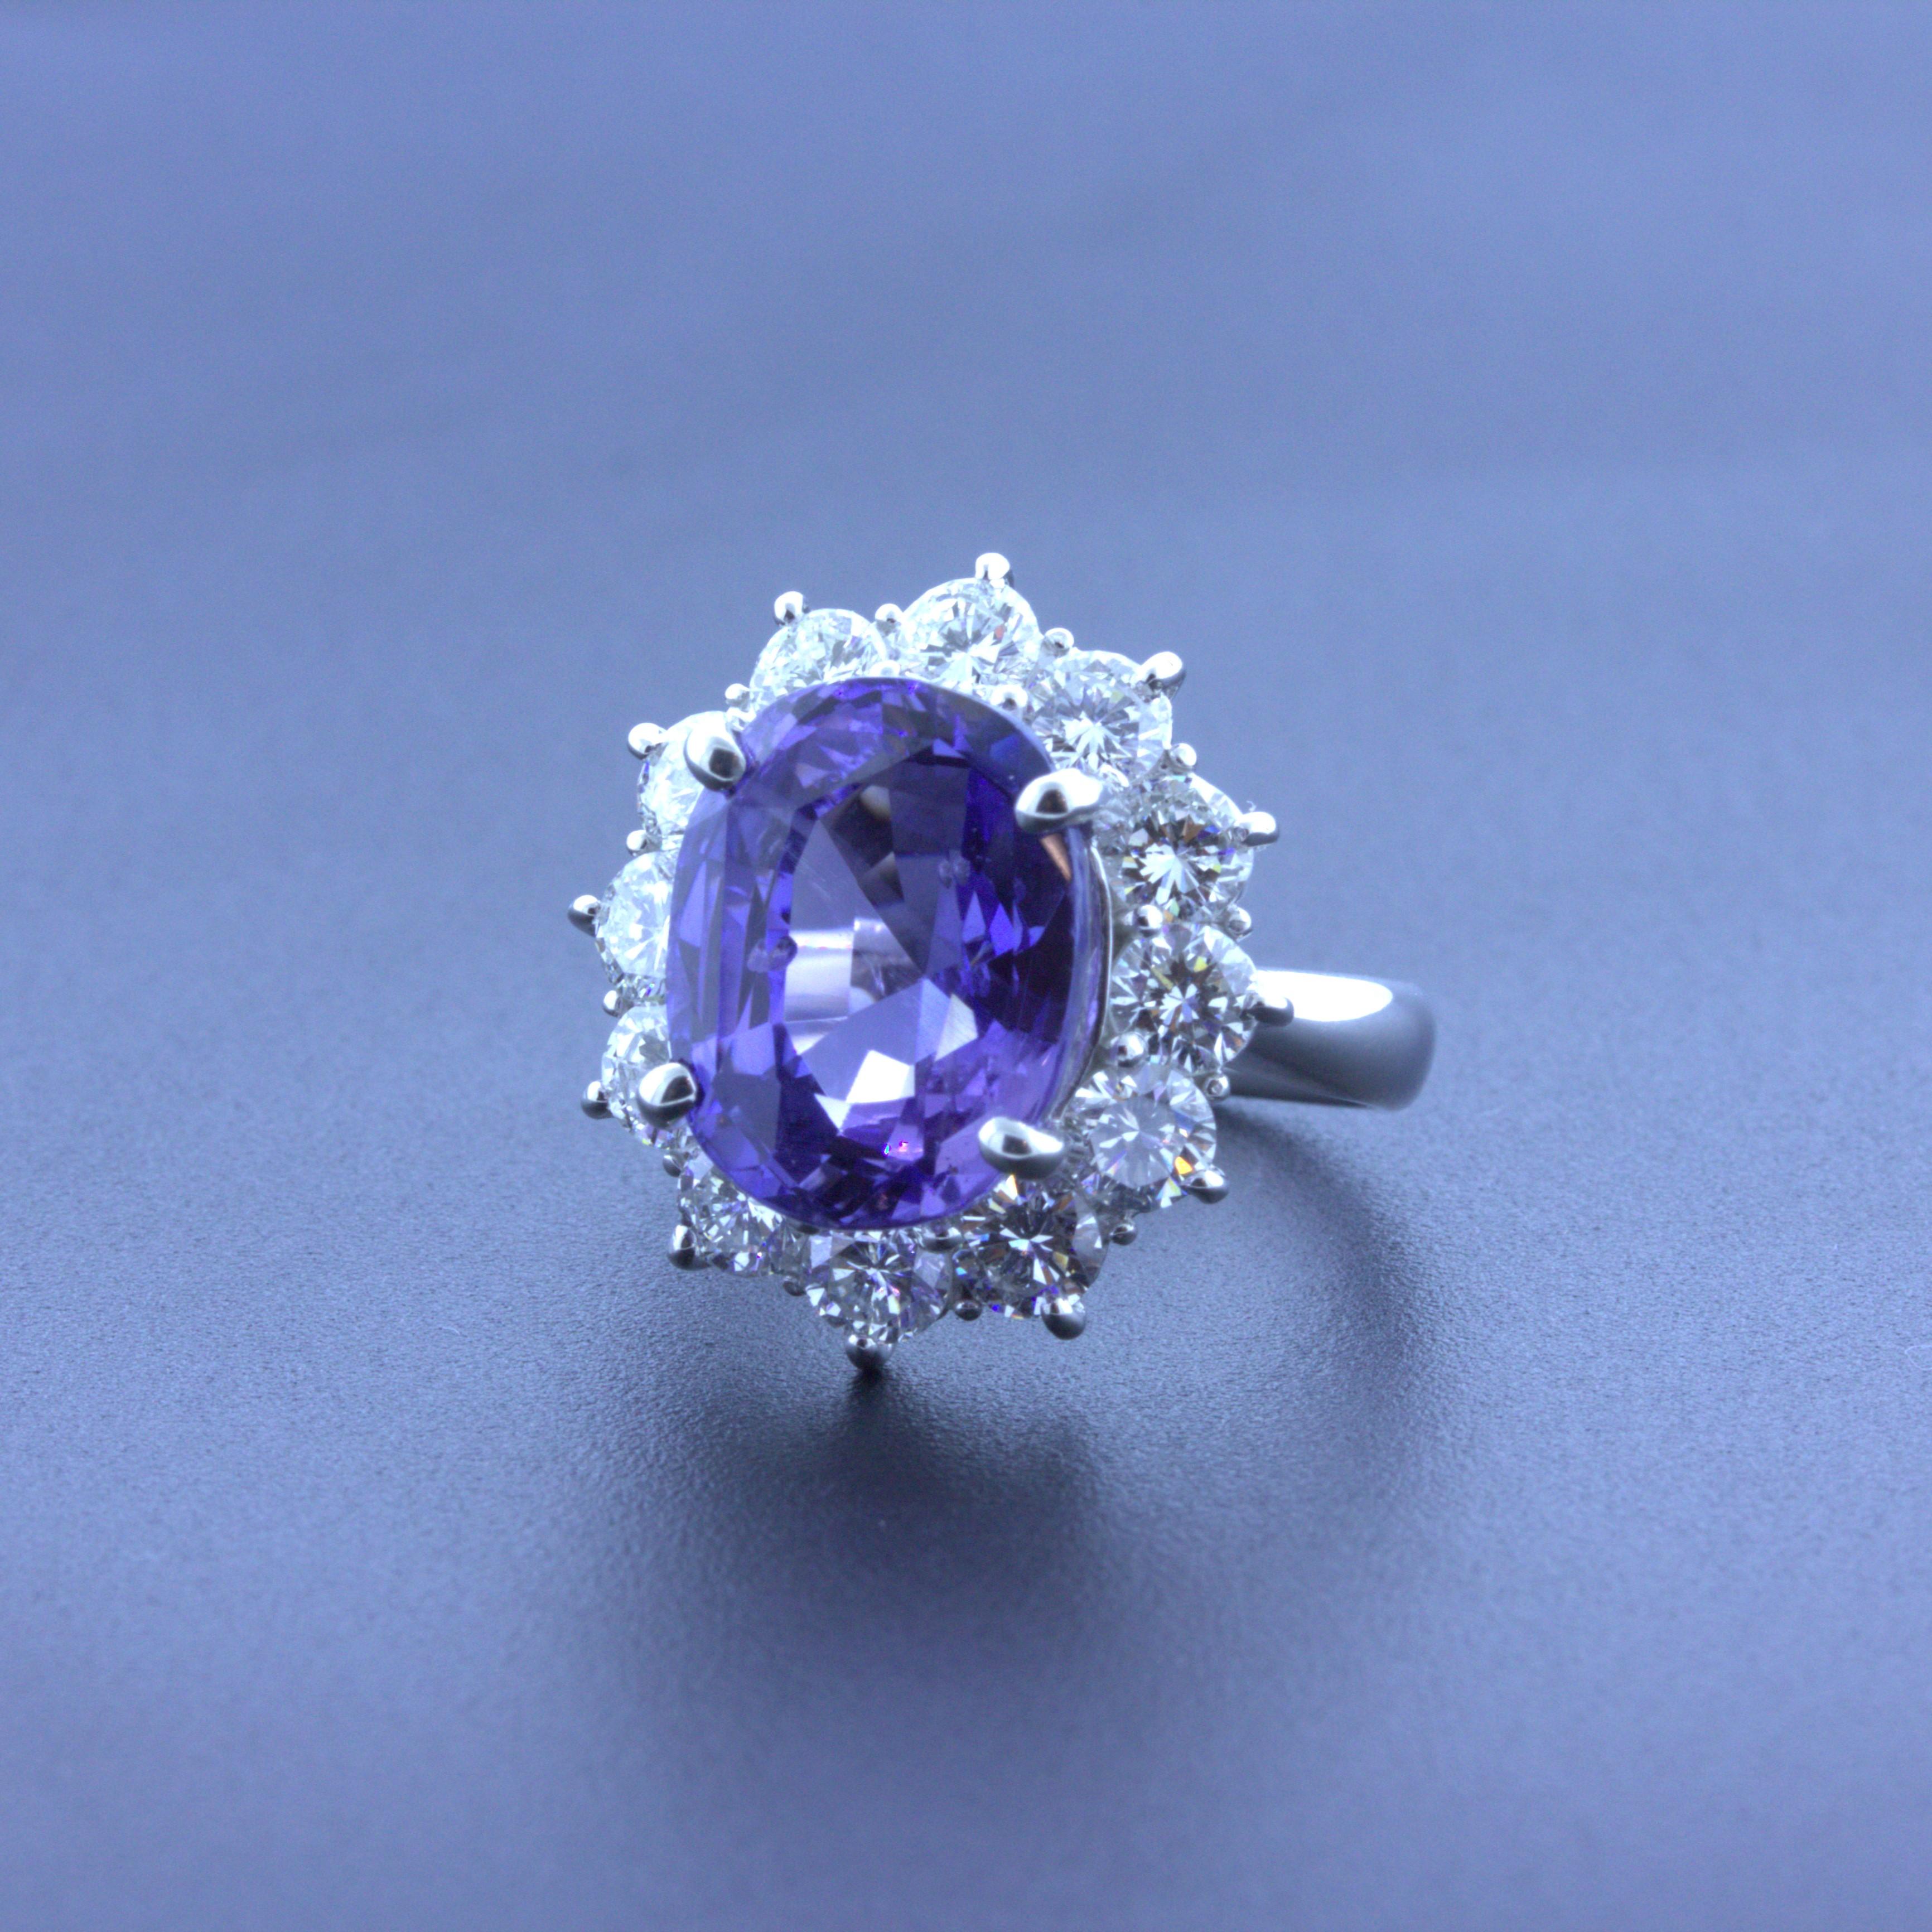 A beautiful and rare Ceylon sapphire takes center stage of this platinum made ring. The sapphire weighs an impressive 9.60 carats and has a unique phenomenon, color-change. In different types of lighting the sapphire changes from a purple/violet